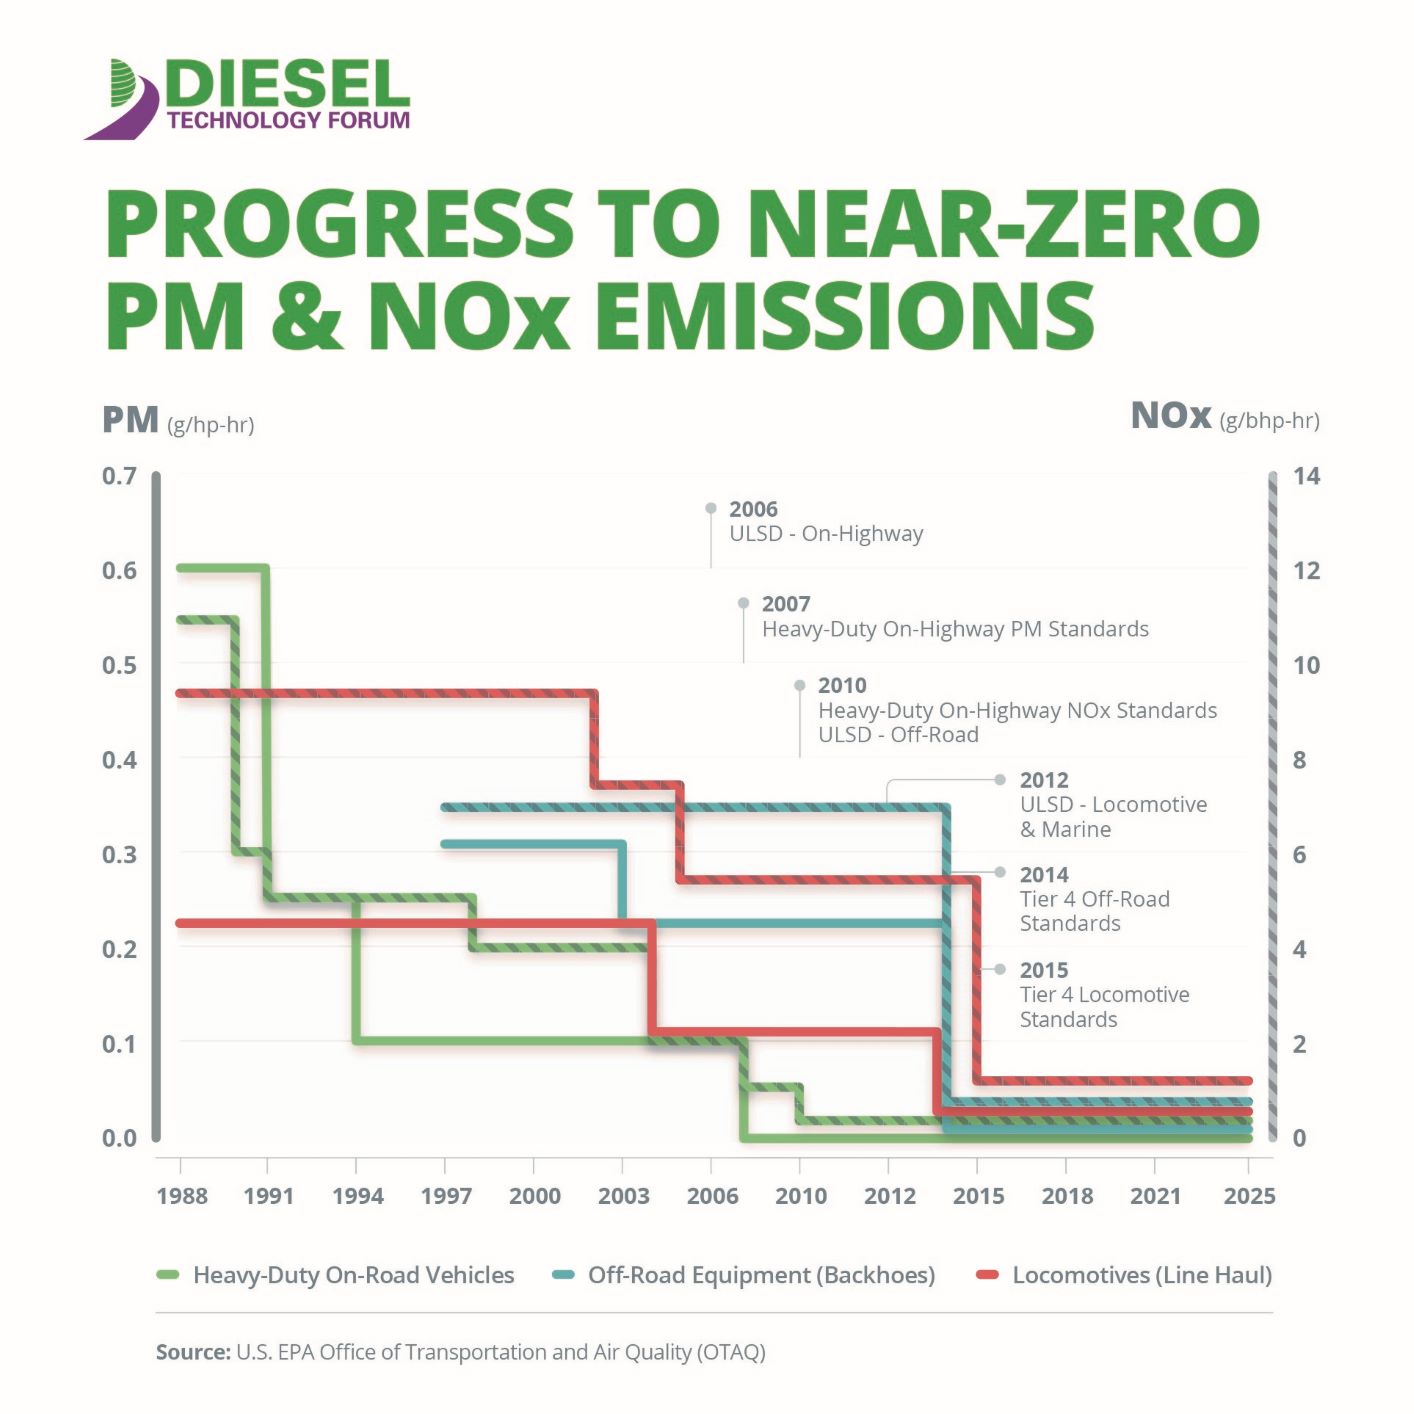 Today’s diesel engines deliver more proven benefits to both customers and society at large by using less energy, achieving near-zero emissions performance, and increasingly using use low-carbon renewable biofuels. What hasn’t changed is diesel’s fundamental durability, reliability, efficiency, economical ownership and operation, expansive service and fueling networks and performance. 